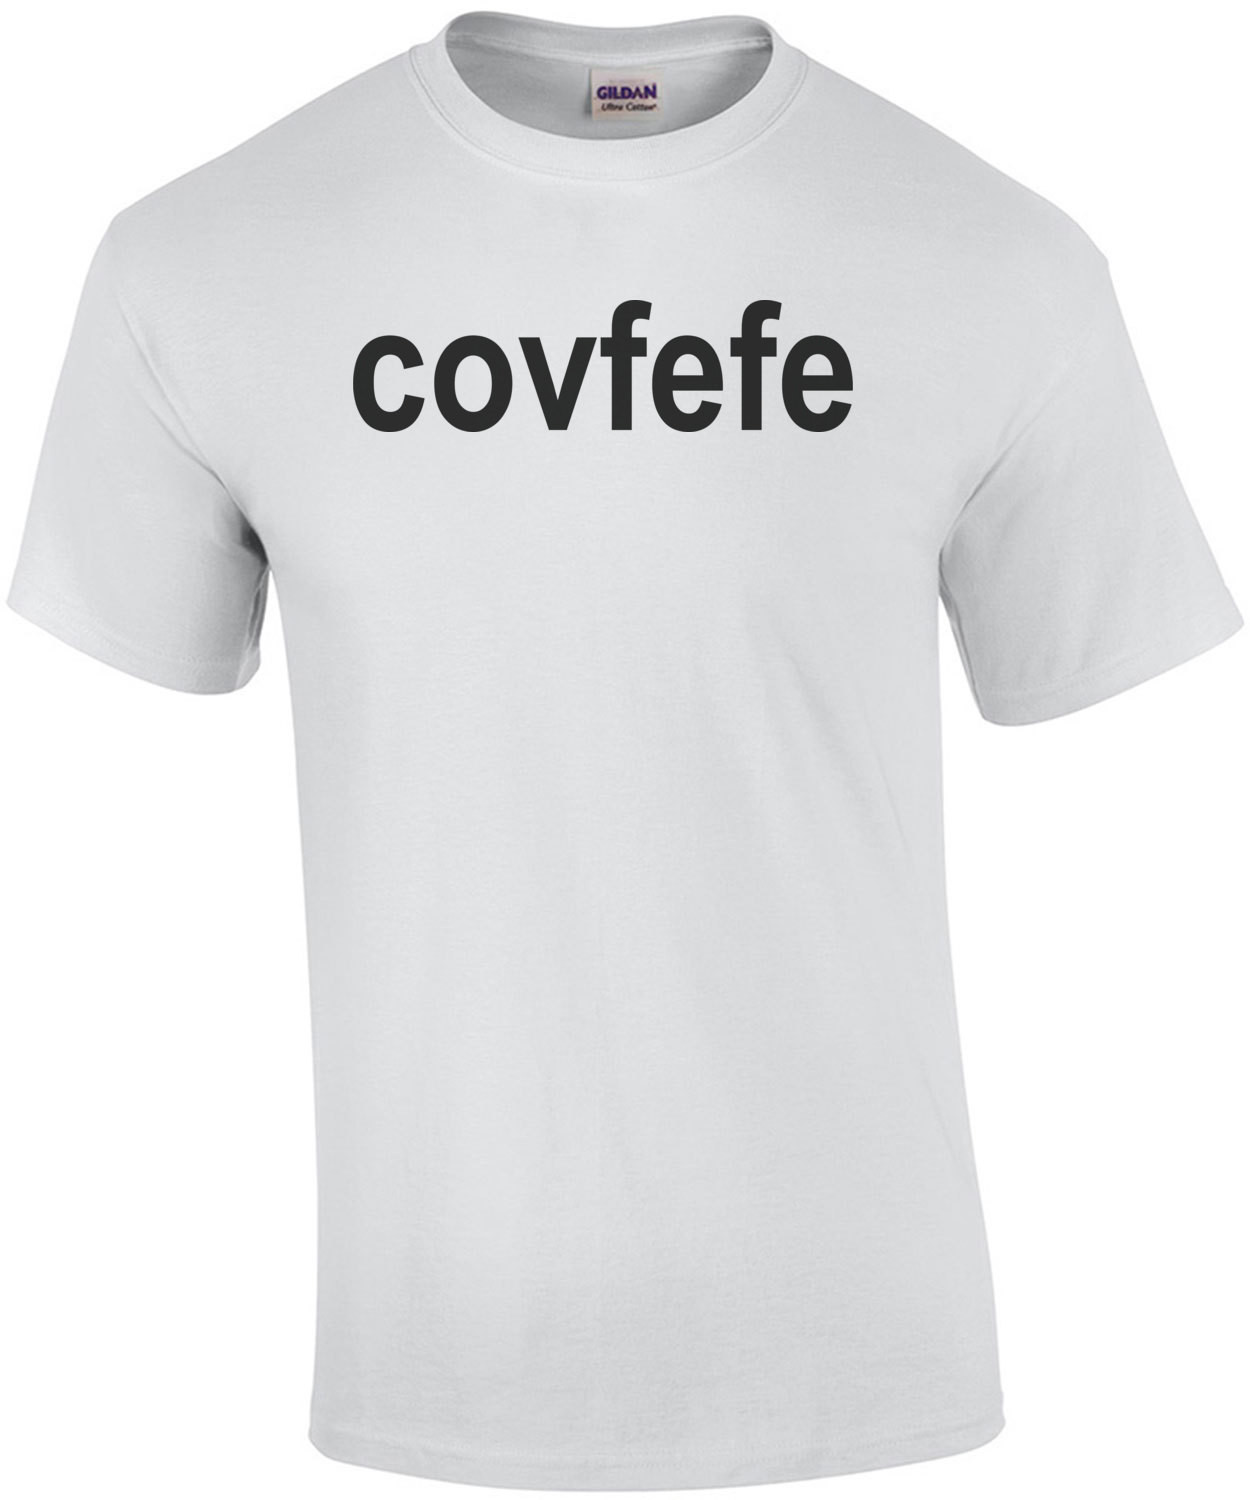 Covfefe Trump on Twitter Funny Shirt